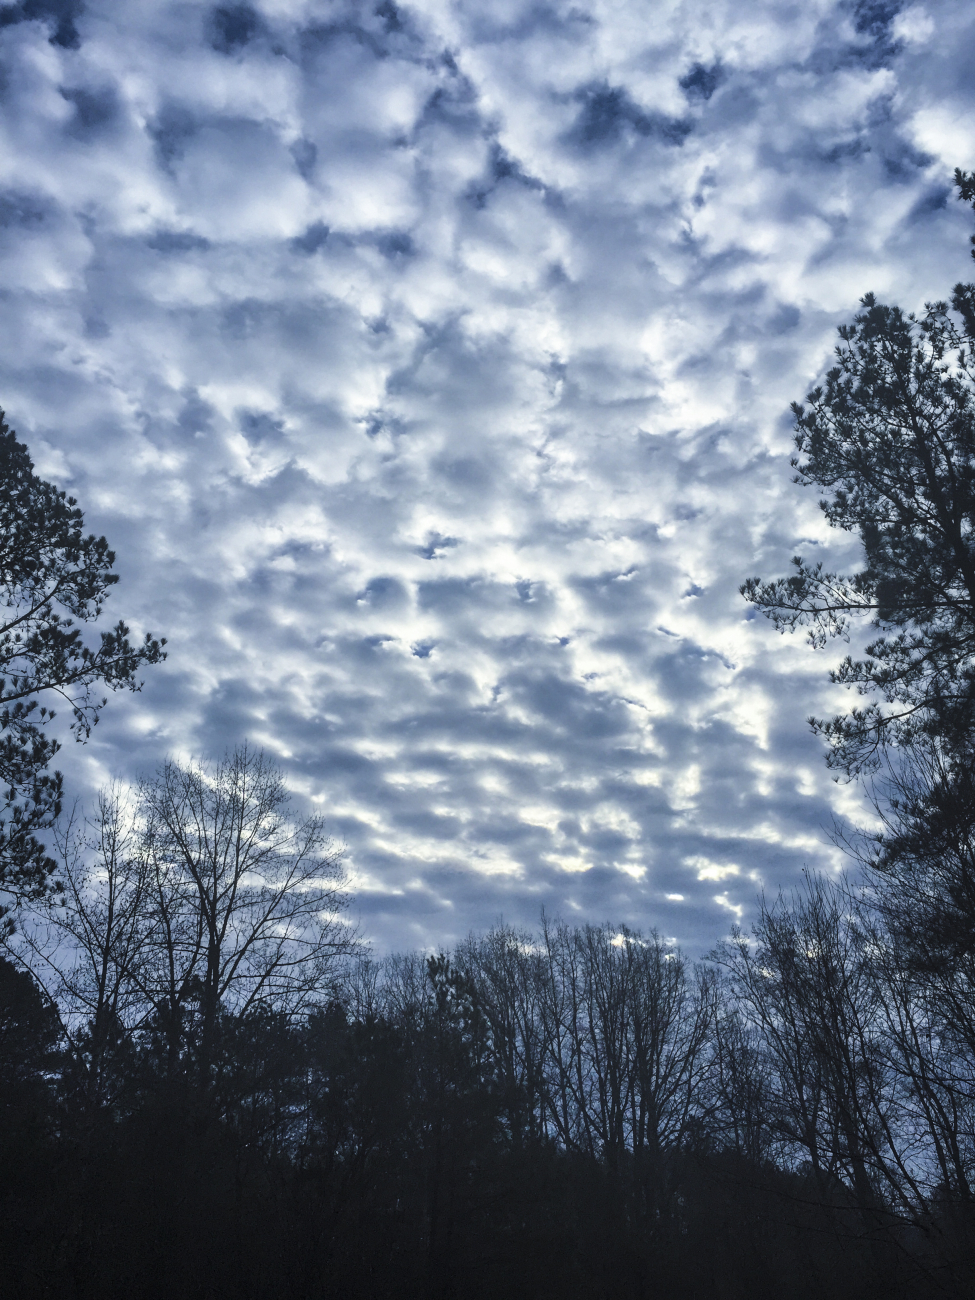 Classic mackerel sky seen early in the morning outside home